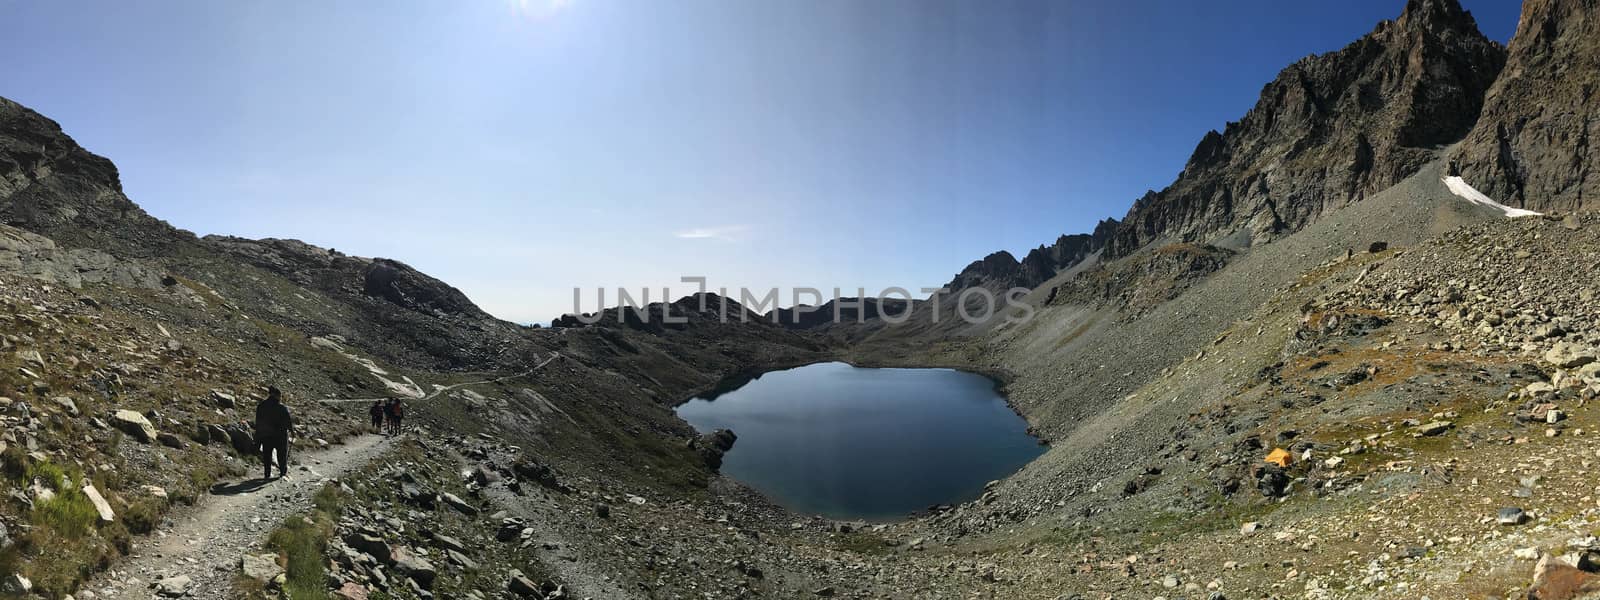 The big lake of Monviso by cosca